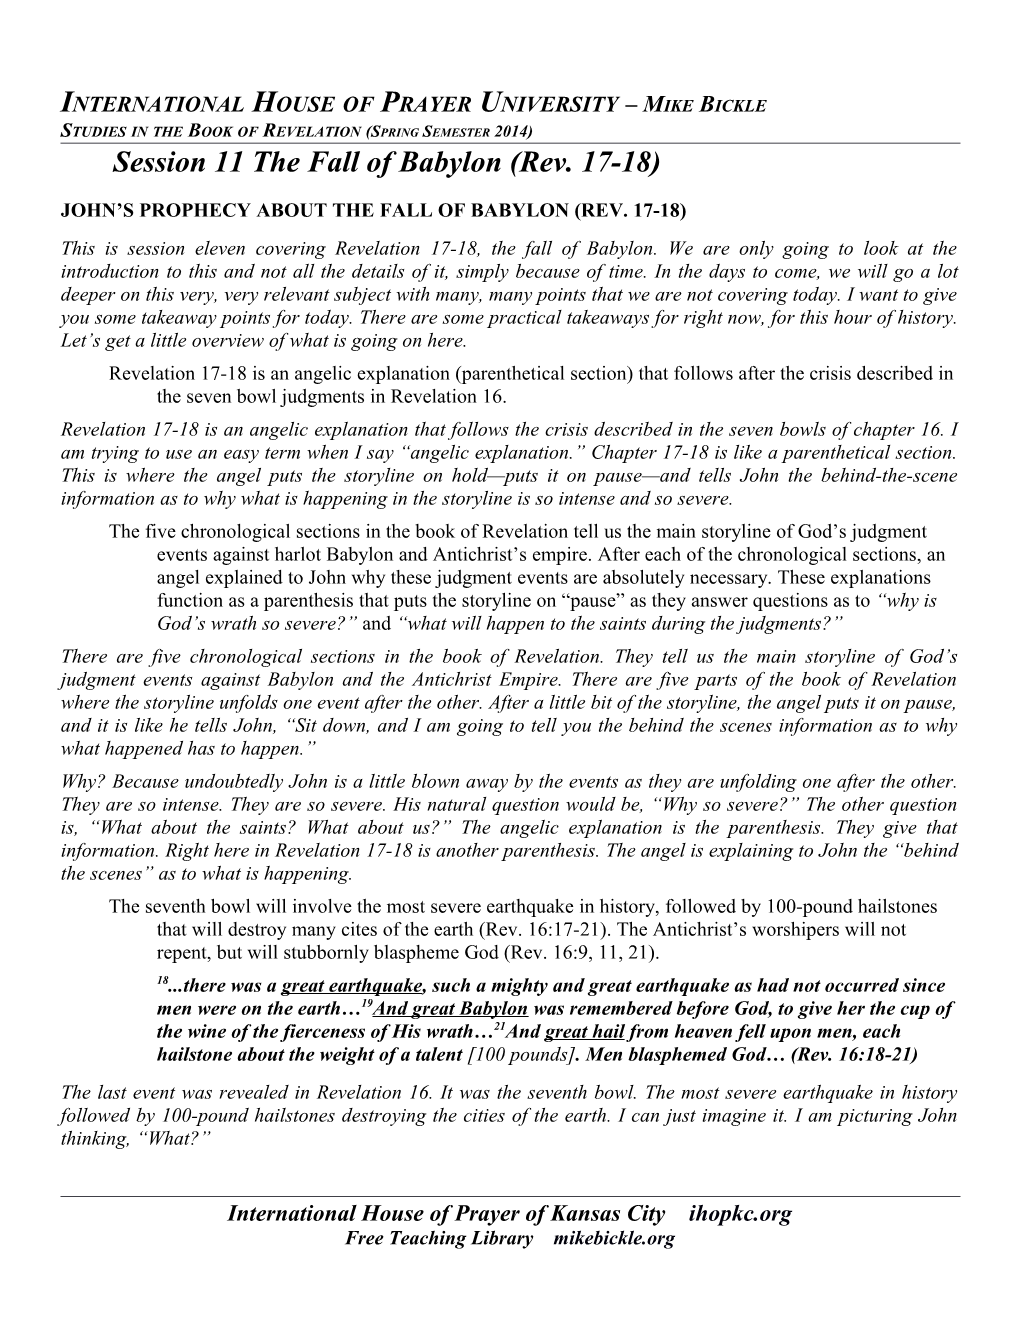 I.John S Prophecy About the Fall of Babylon (Rev. 17-18)